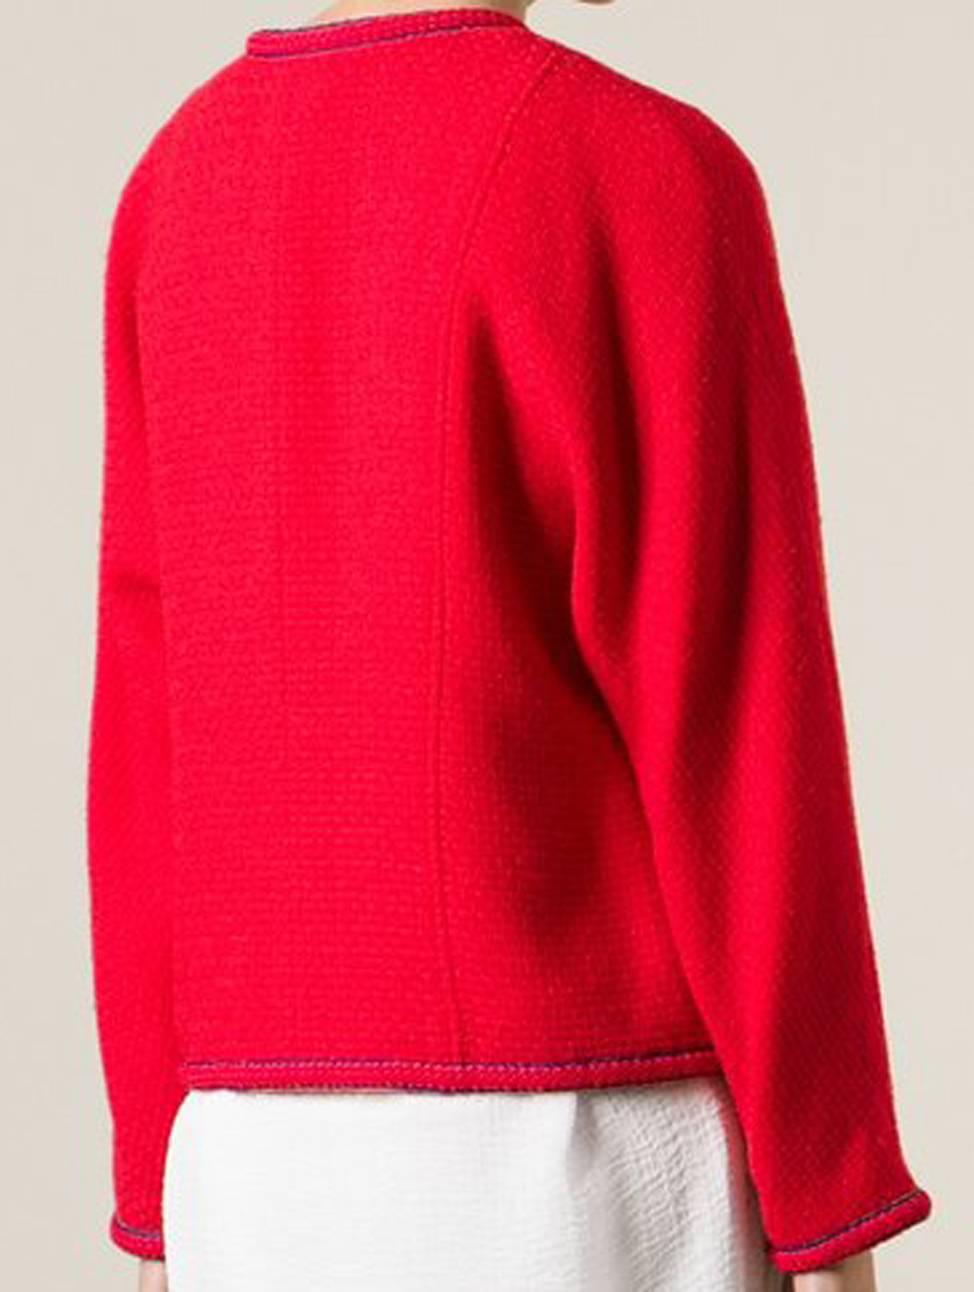 Chanel red wool classic bouclé jacket featuring a collarless design, long sleeves, two chest pockets and a cropped length. 
In excellent vintage condition. Made in France.
Estimated size:38fr
We guarantee you will receive this gorgeous item as